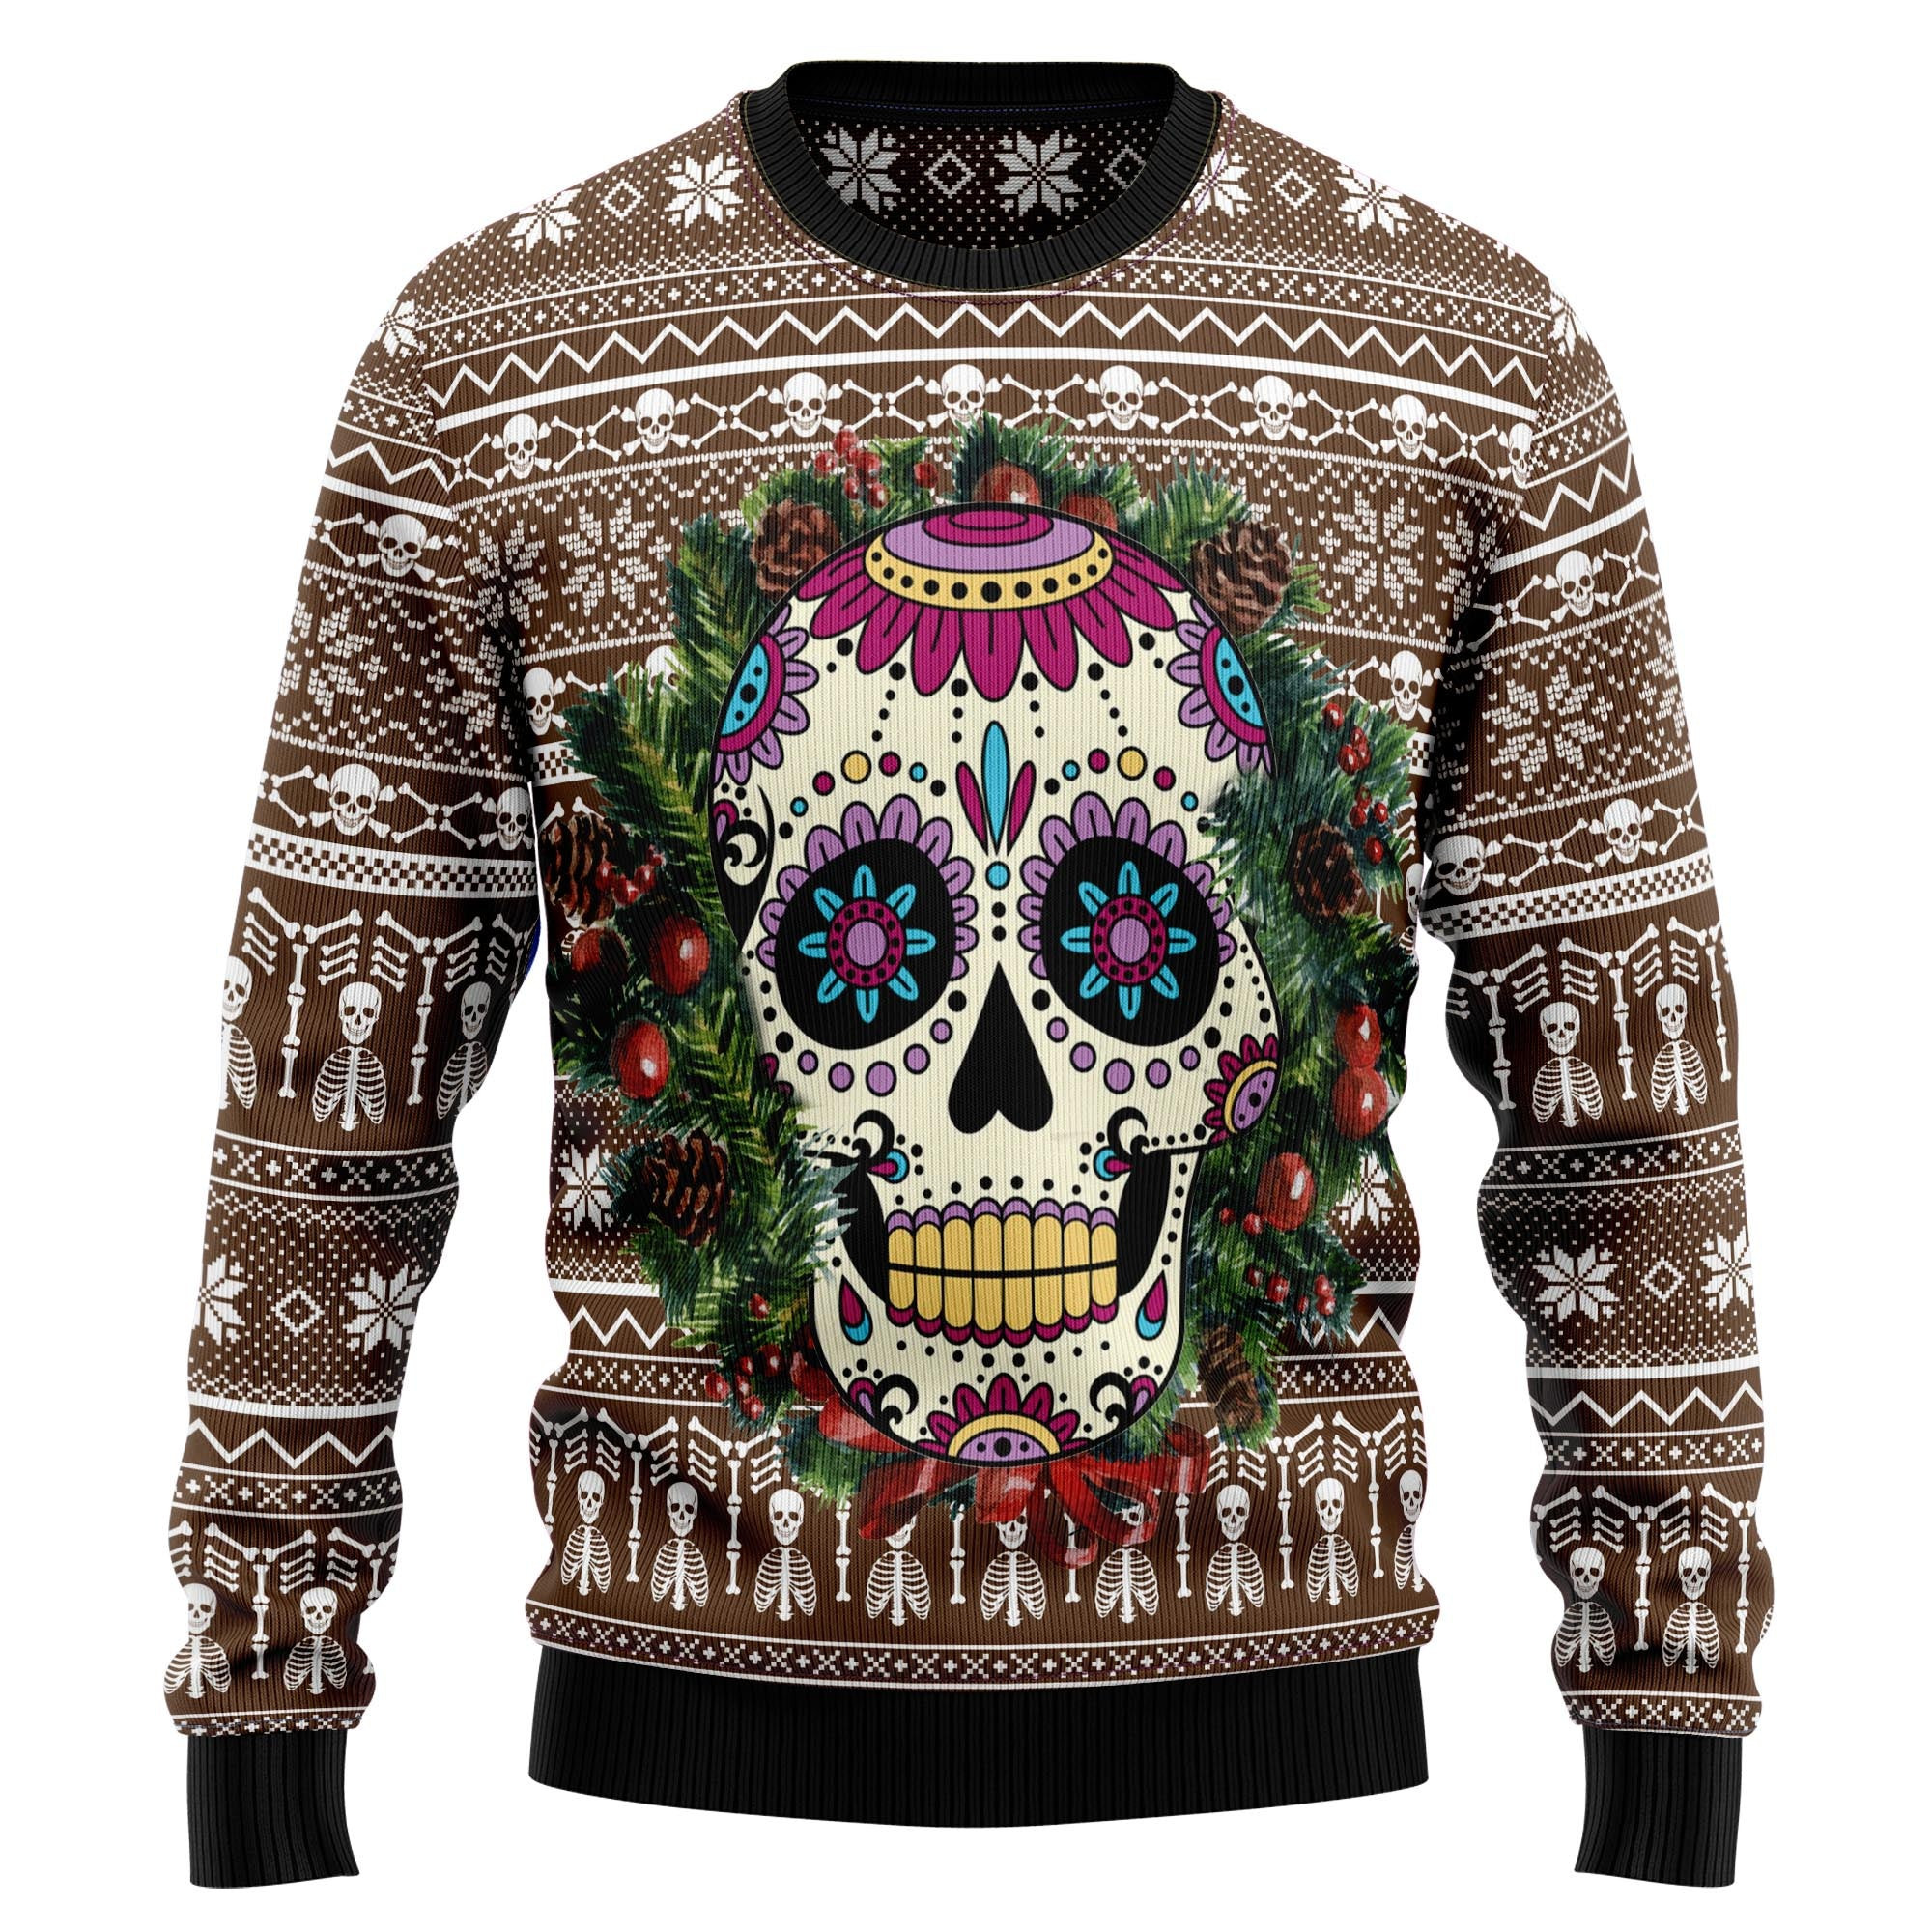 Awesome Sugar Skull Ugly Christmas Sweater, Ugly Sweater For Men Women, Holiday Sweater